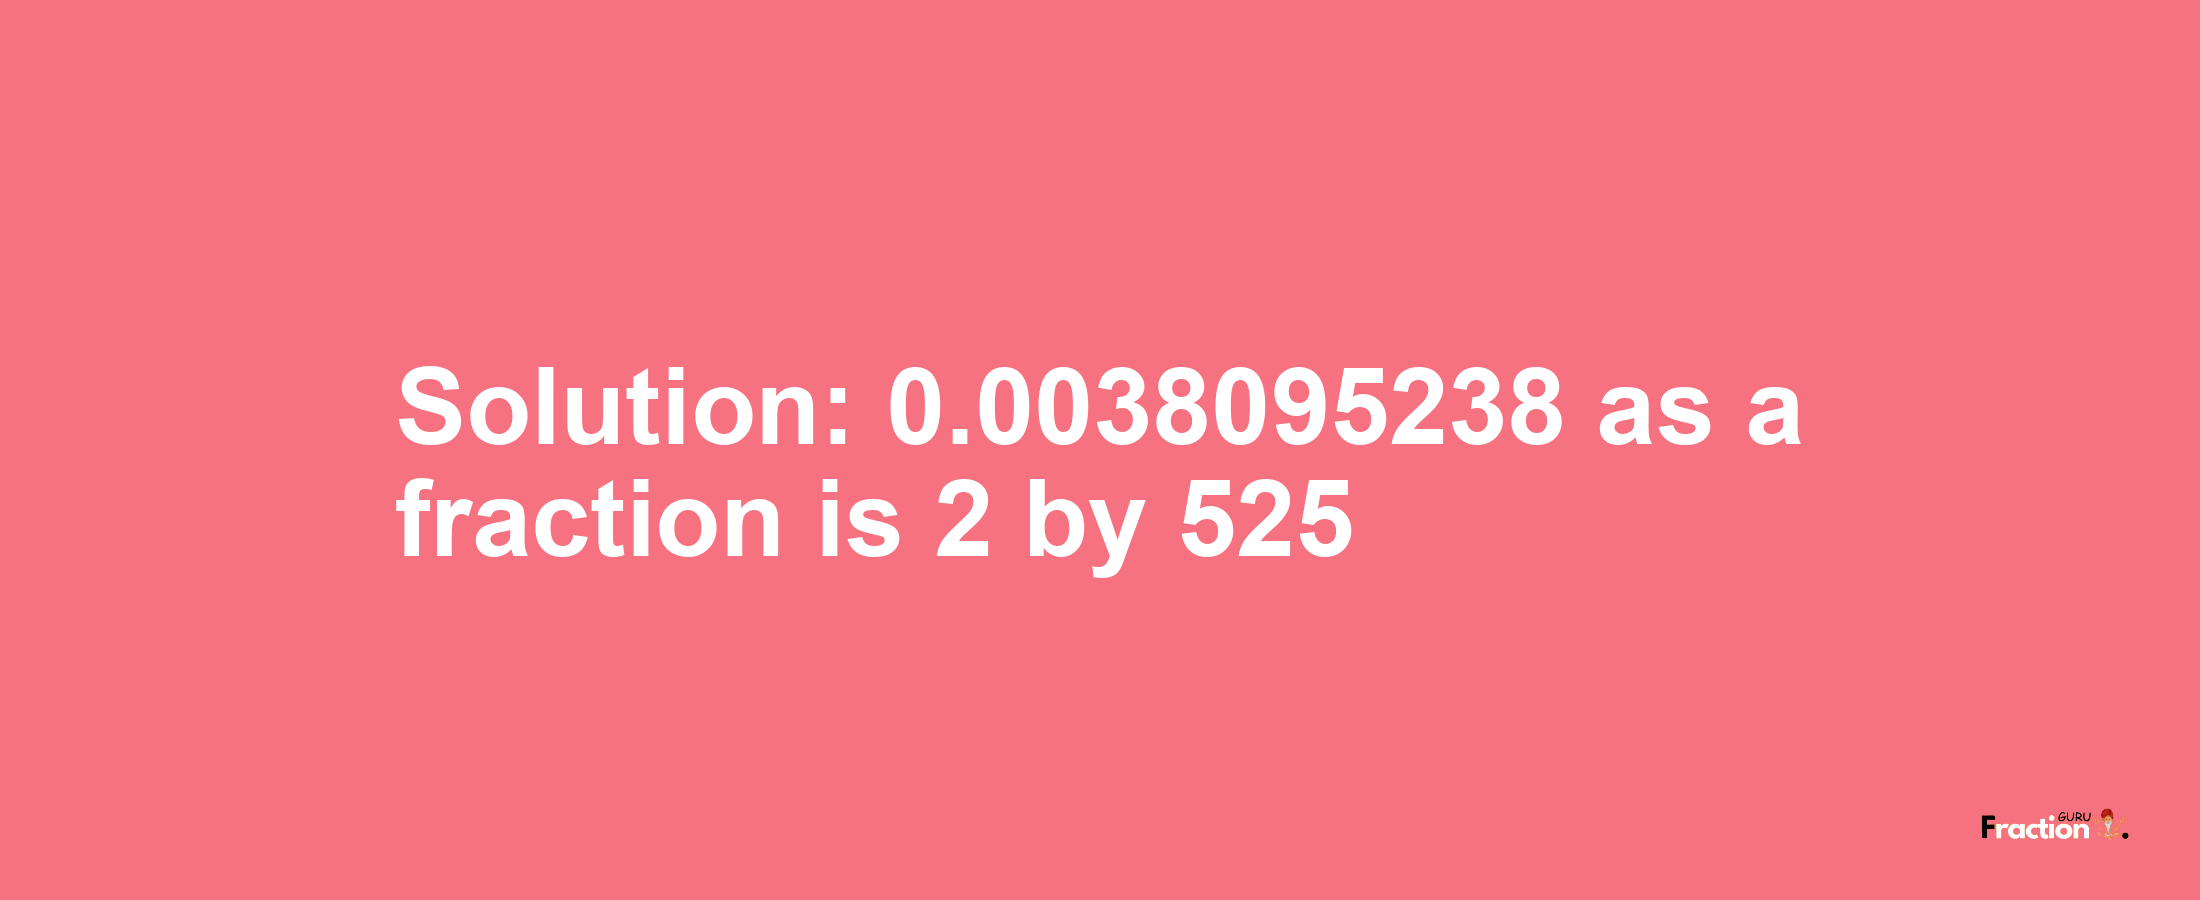 Solution:0.0038095238 as a fraction is 2/525